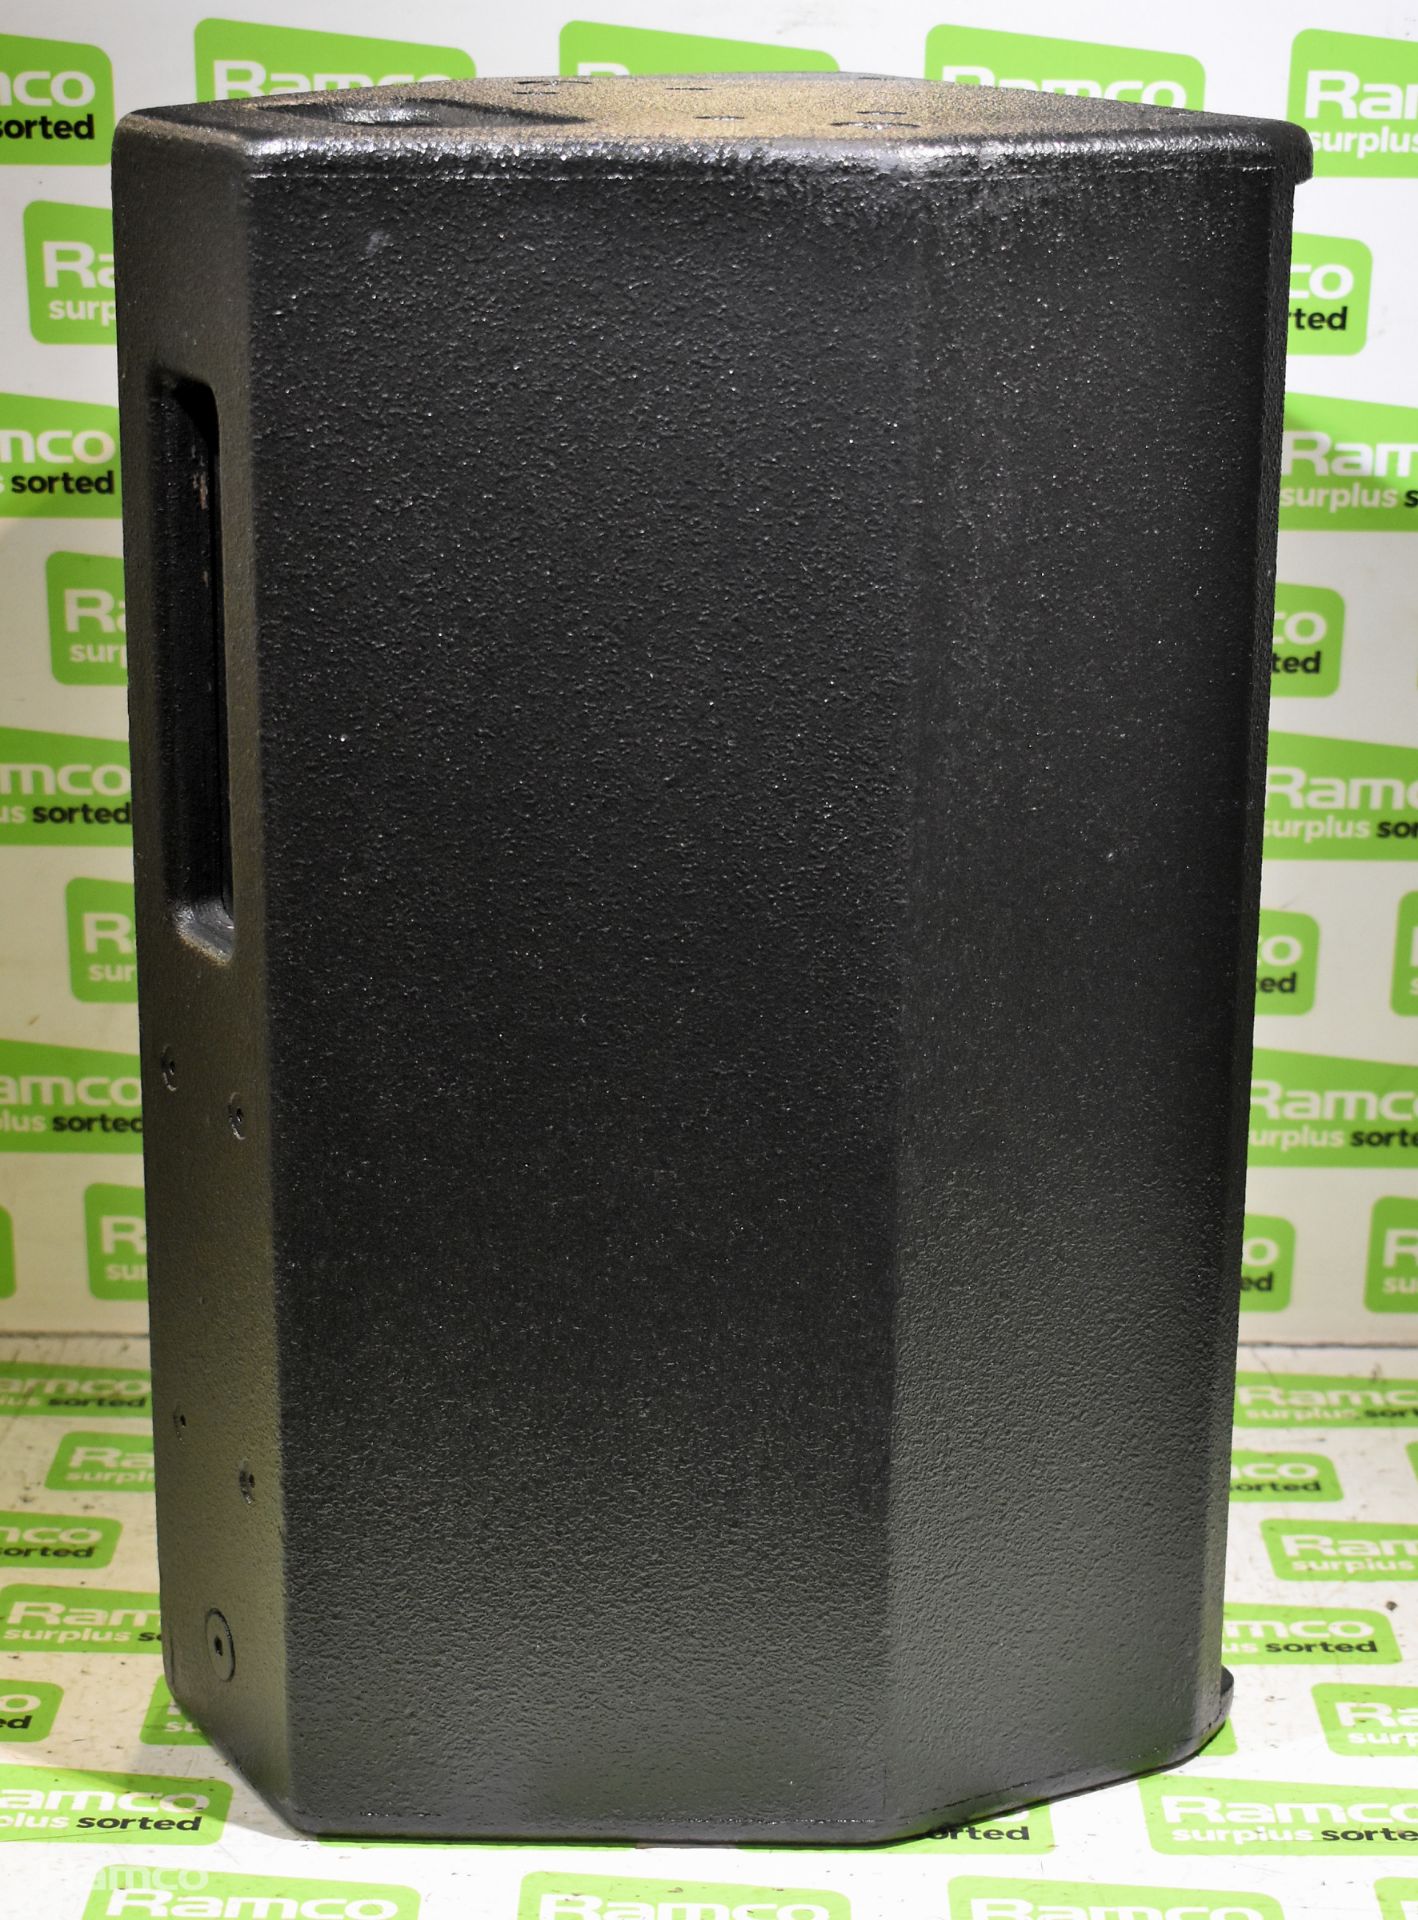 2x Logic LS8 loudspeakers - NL4 connection - recently painted with soft bag - Bild 4 aus 8